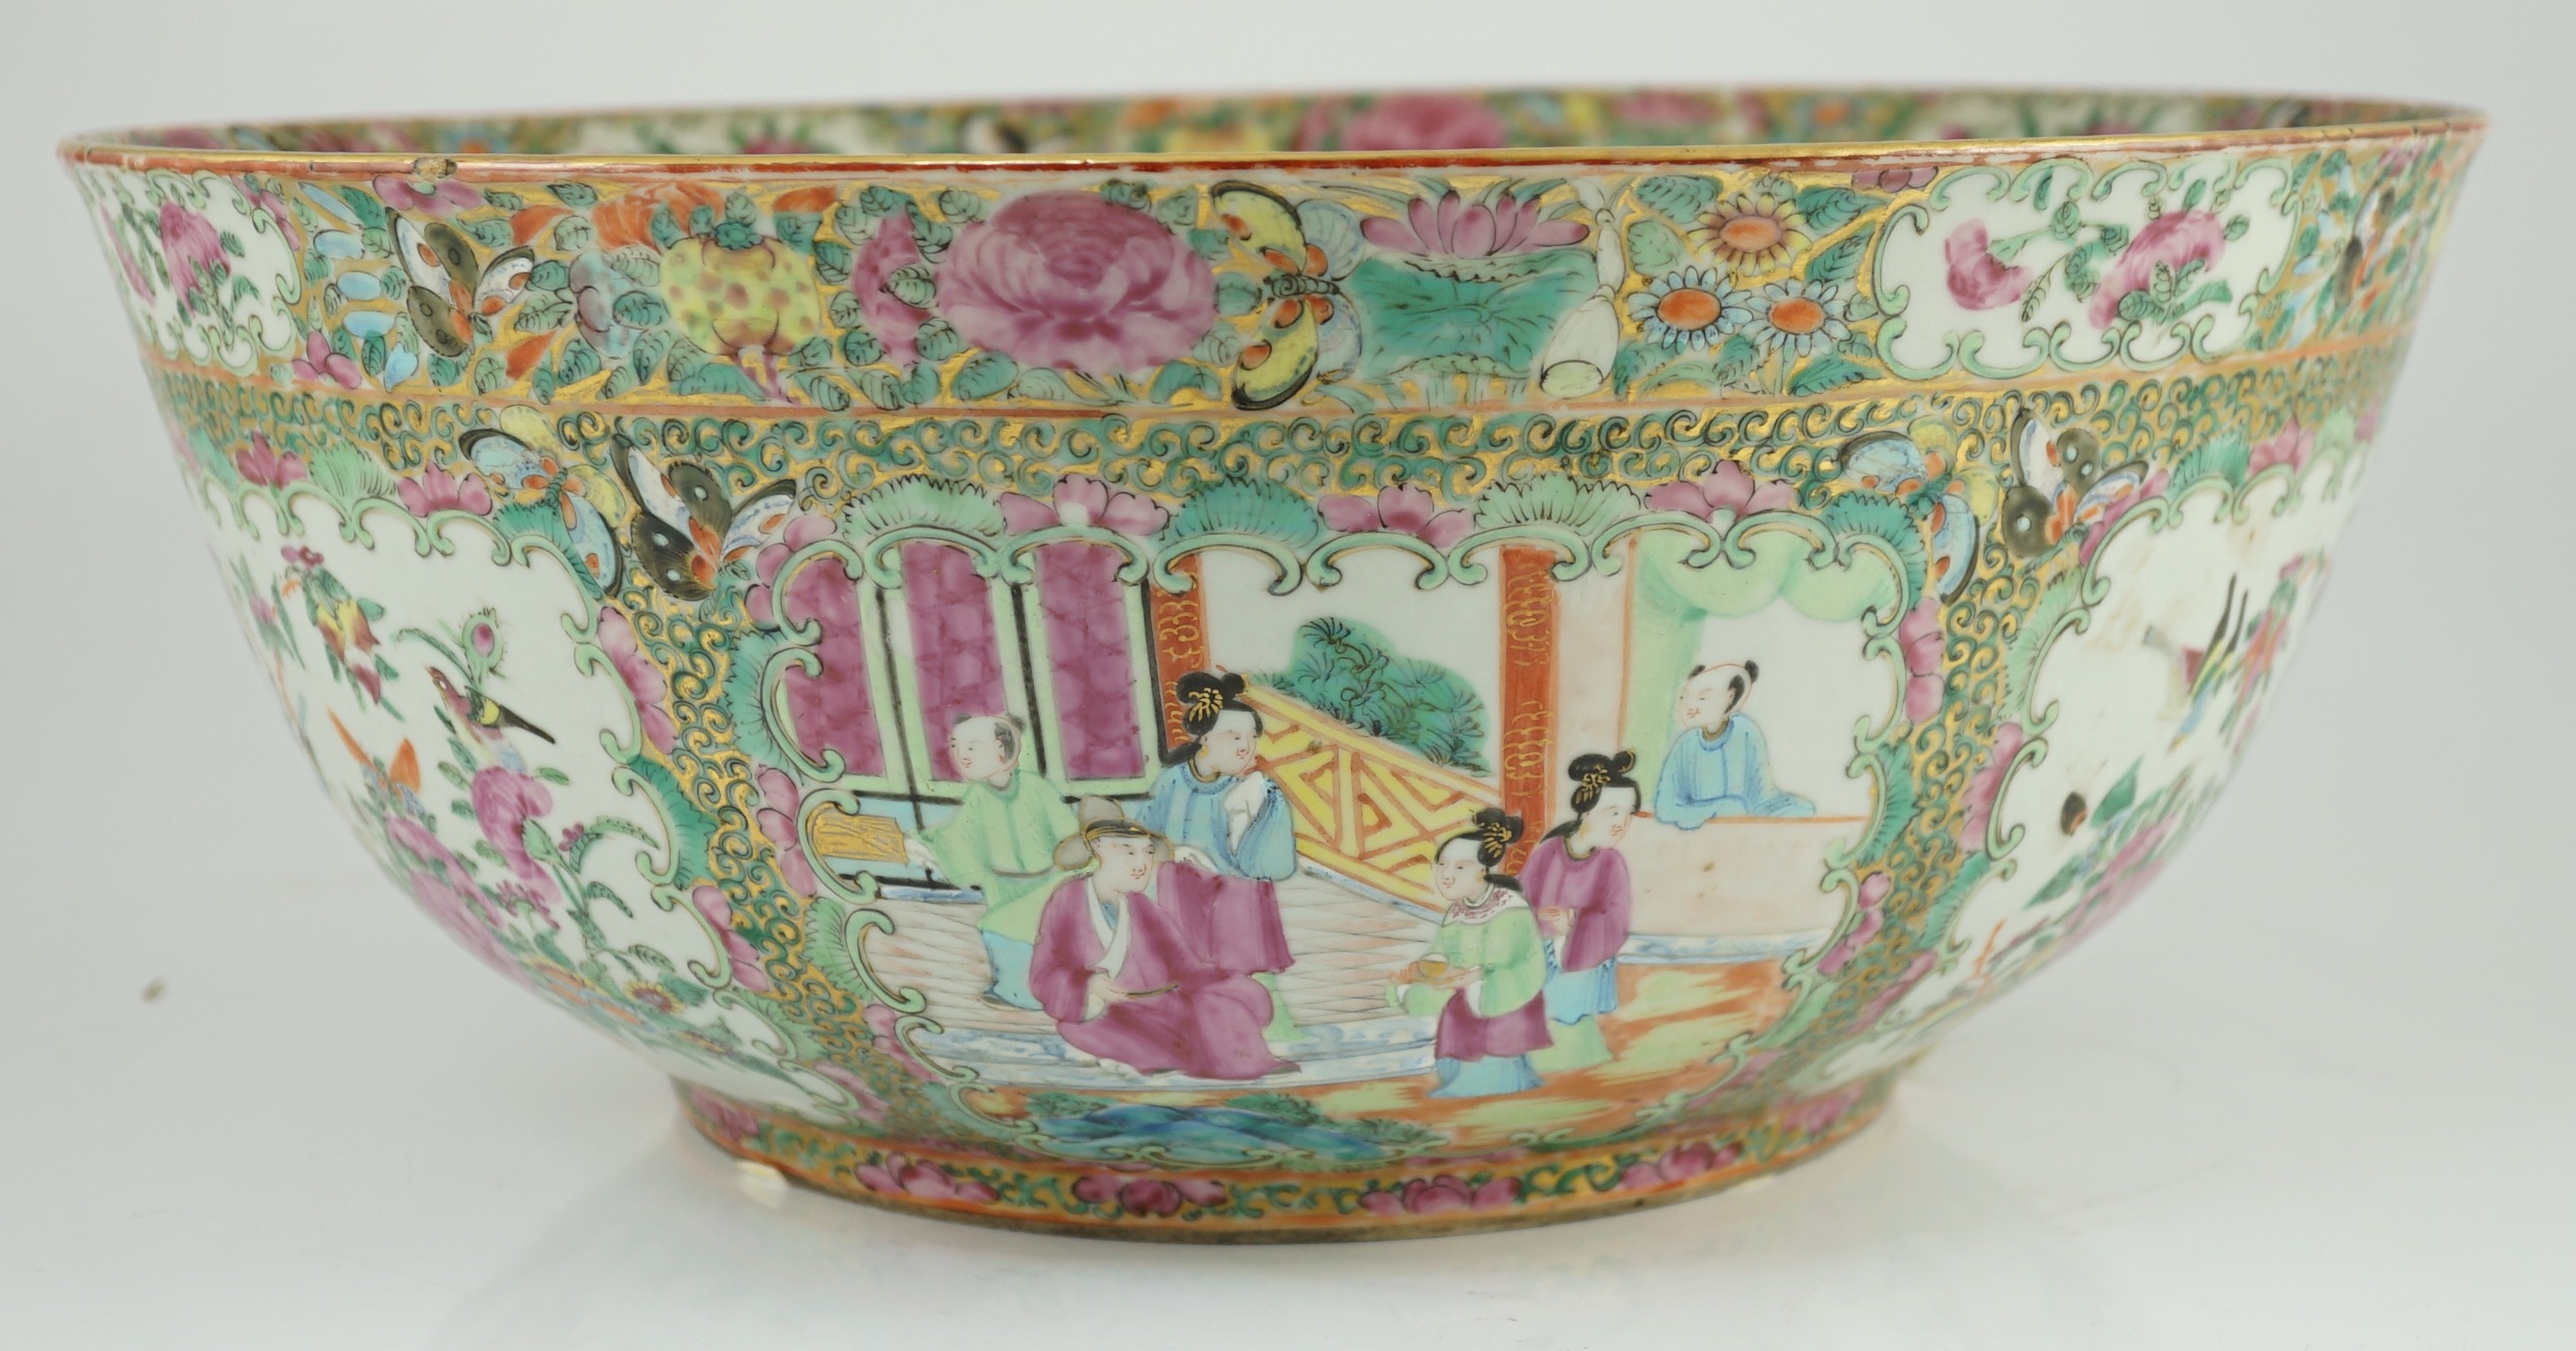 A large Chinese Canton (Guangzhou) decorated famille rose bowl, c.1830-50, typically painted to - Image 3 of 9